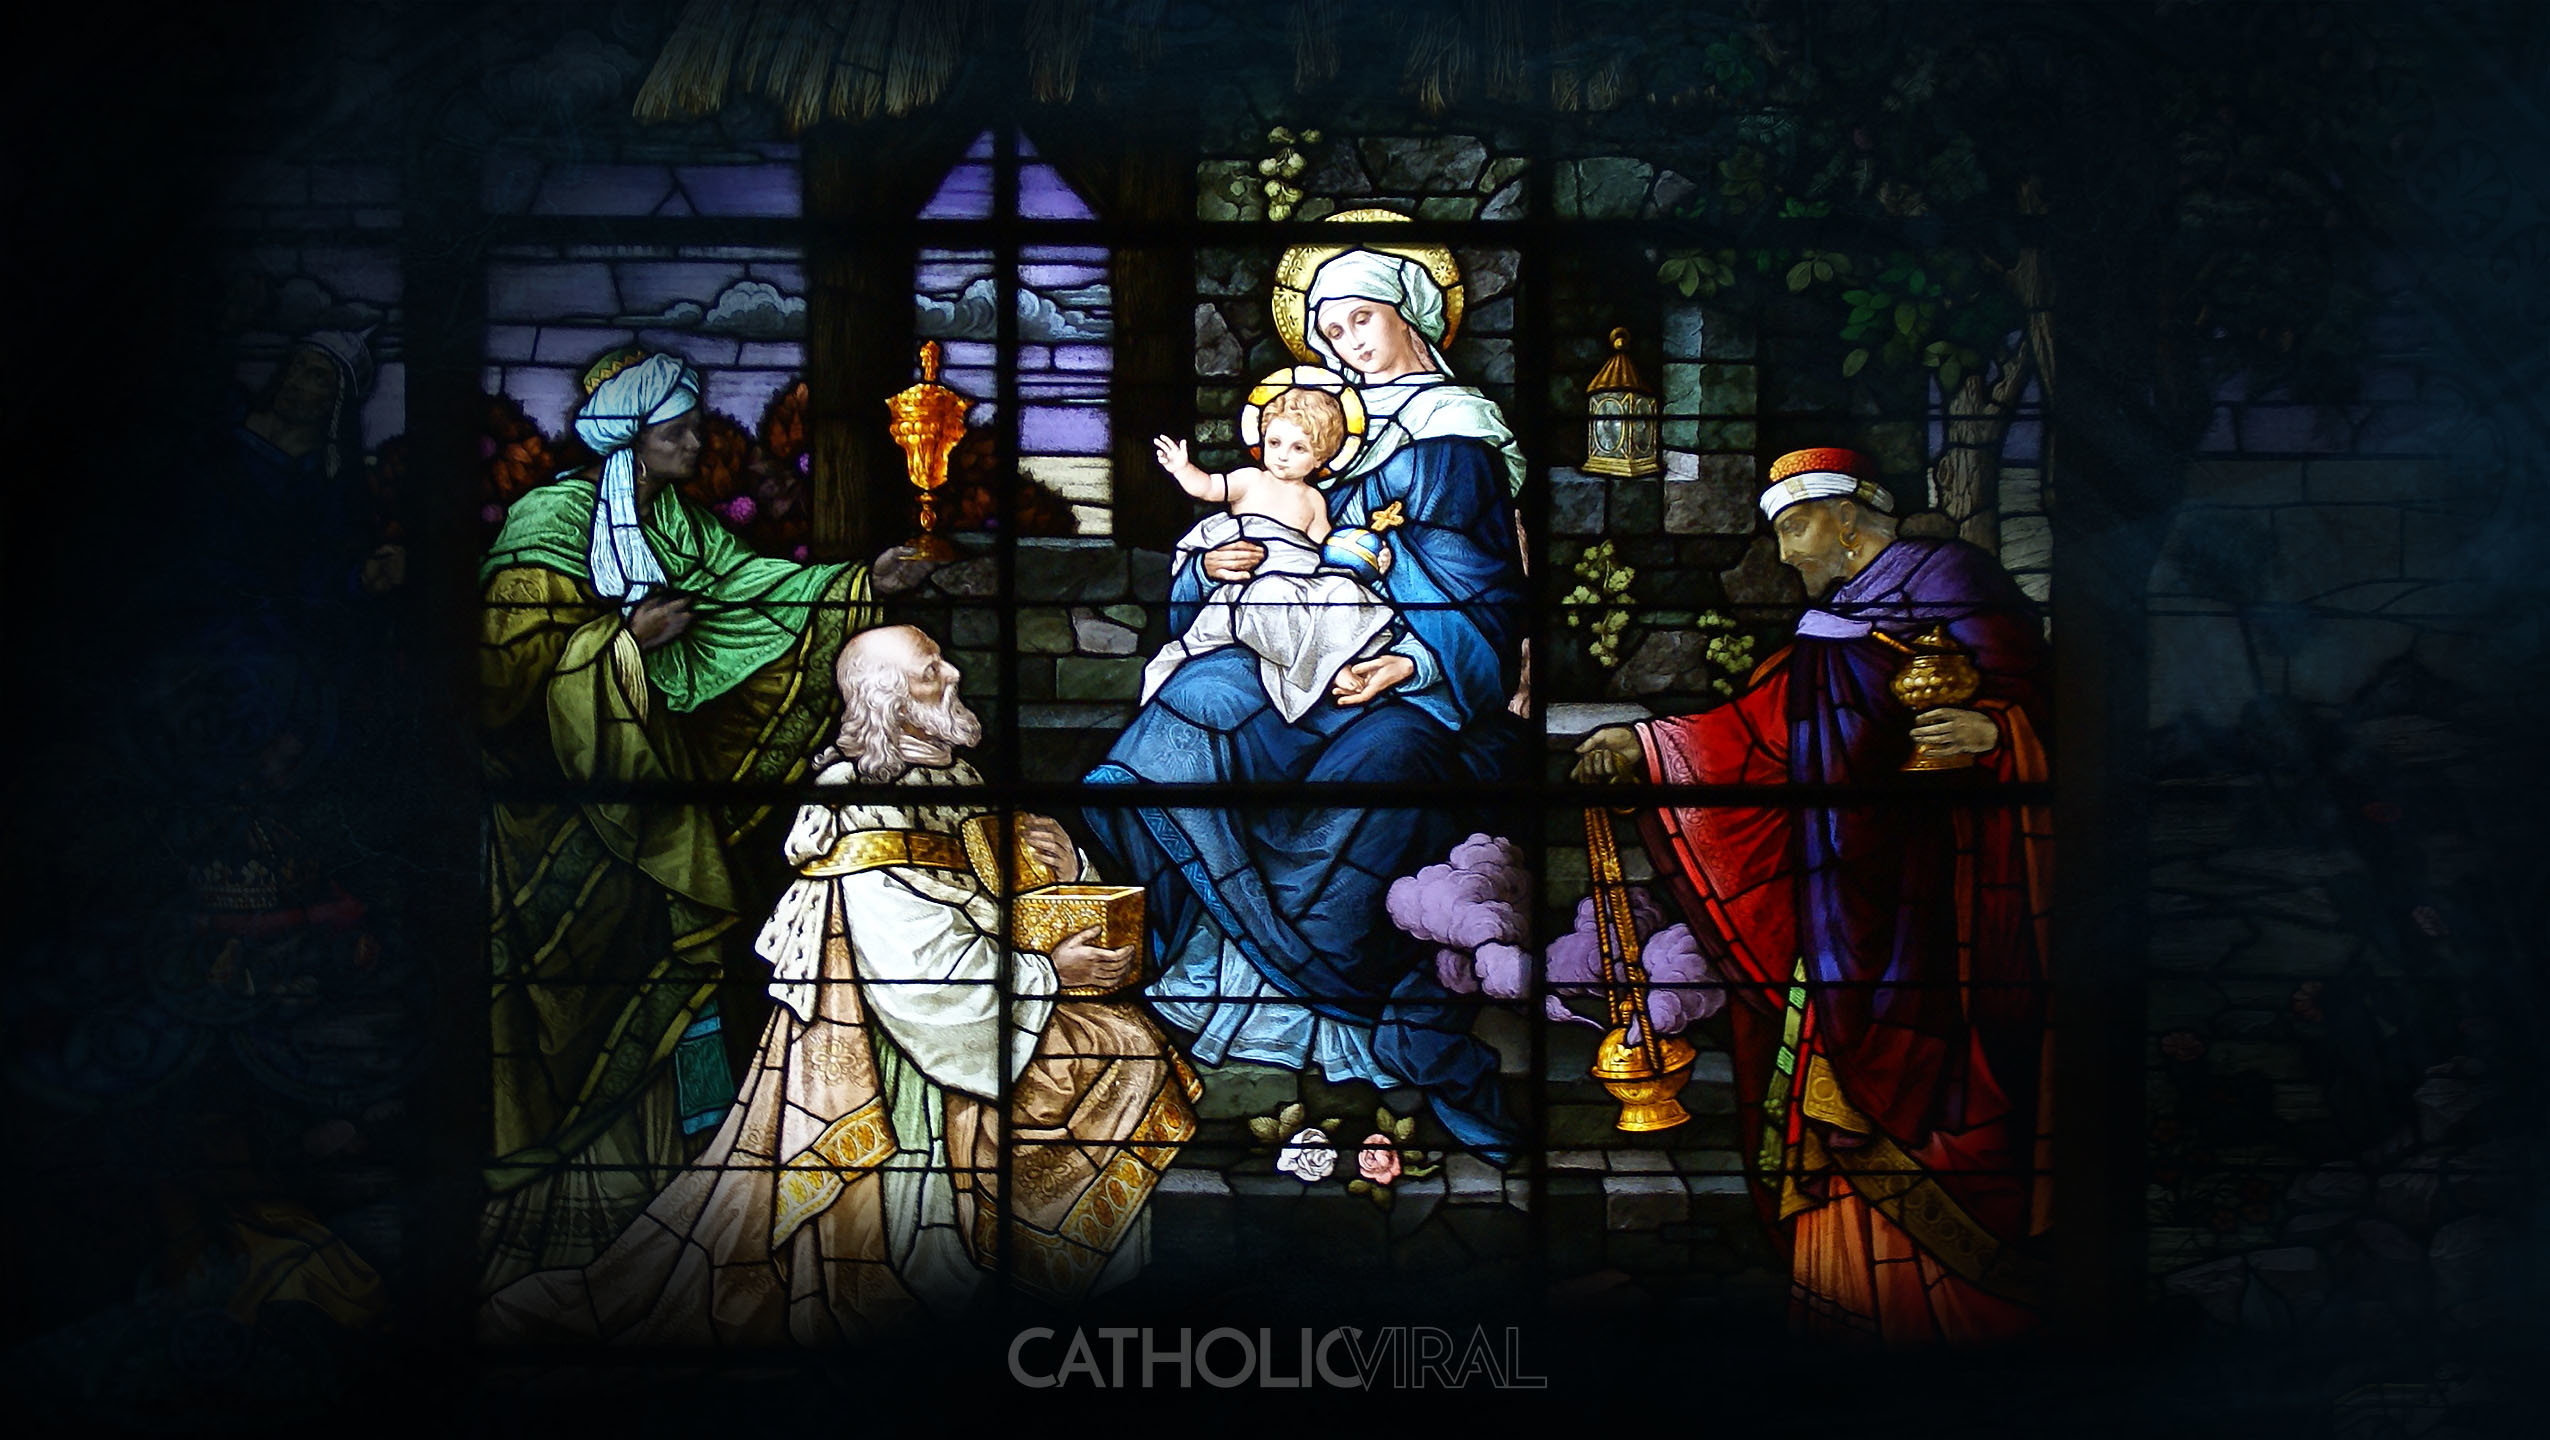 2550x1440 ... Nativity - HD Christmas Wallpapers - The Adoration. Share!